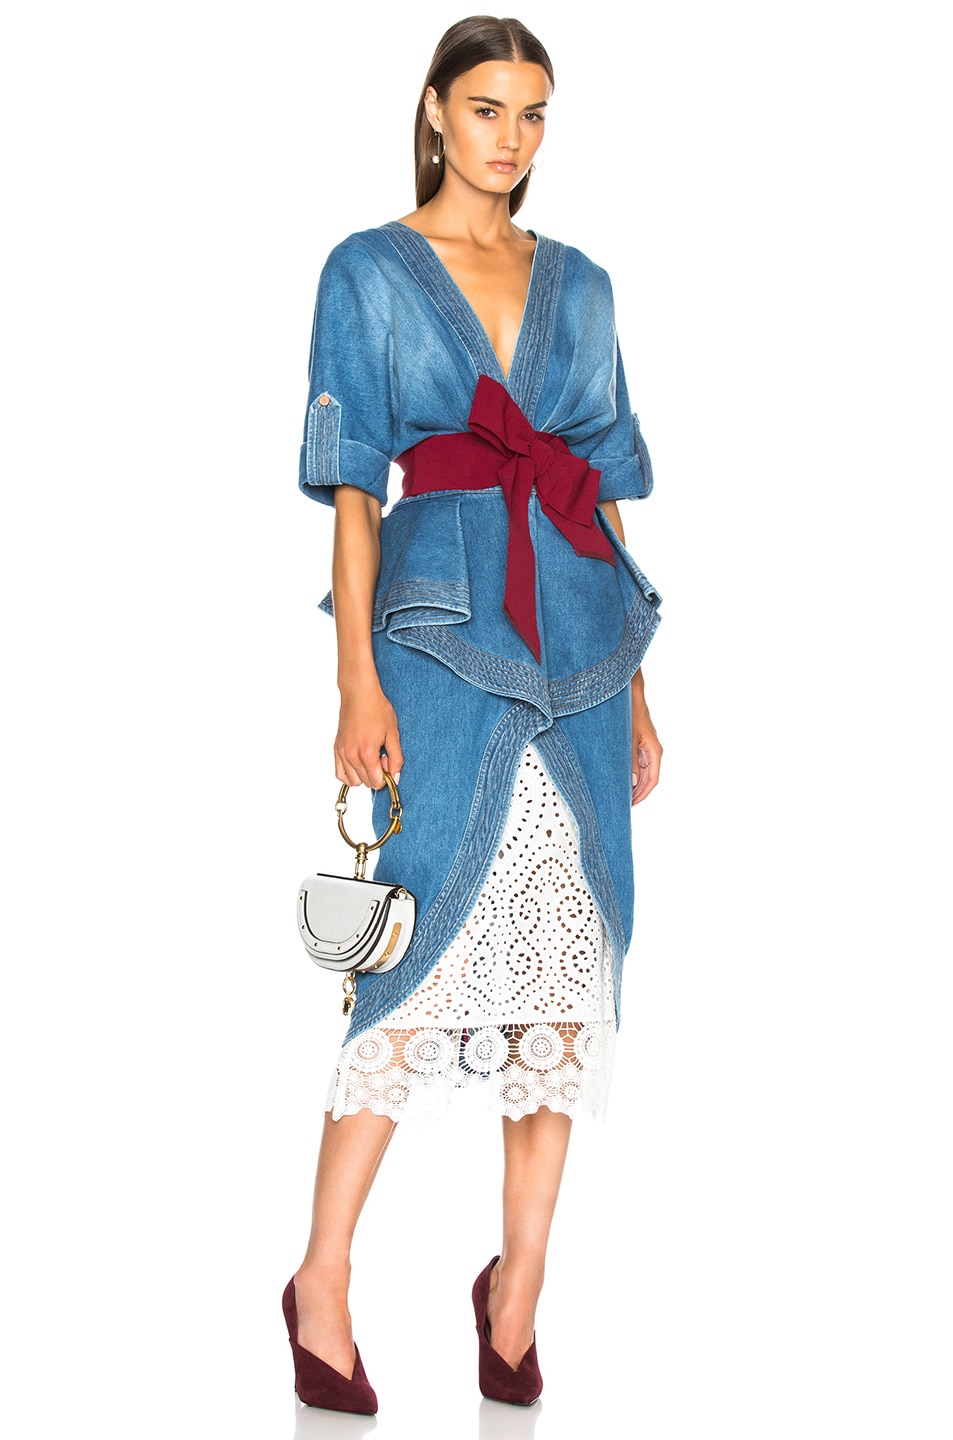 Image 1 of Johanna Ortiz Nuevo Mexicana Cotton Denim Trench Coat with Belt and Underskirt in Agave Washed Blue Denim